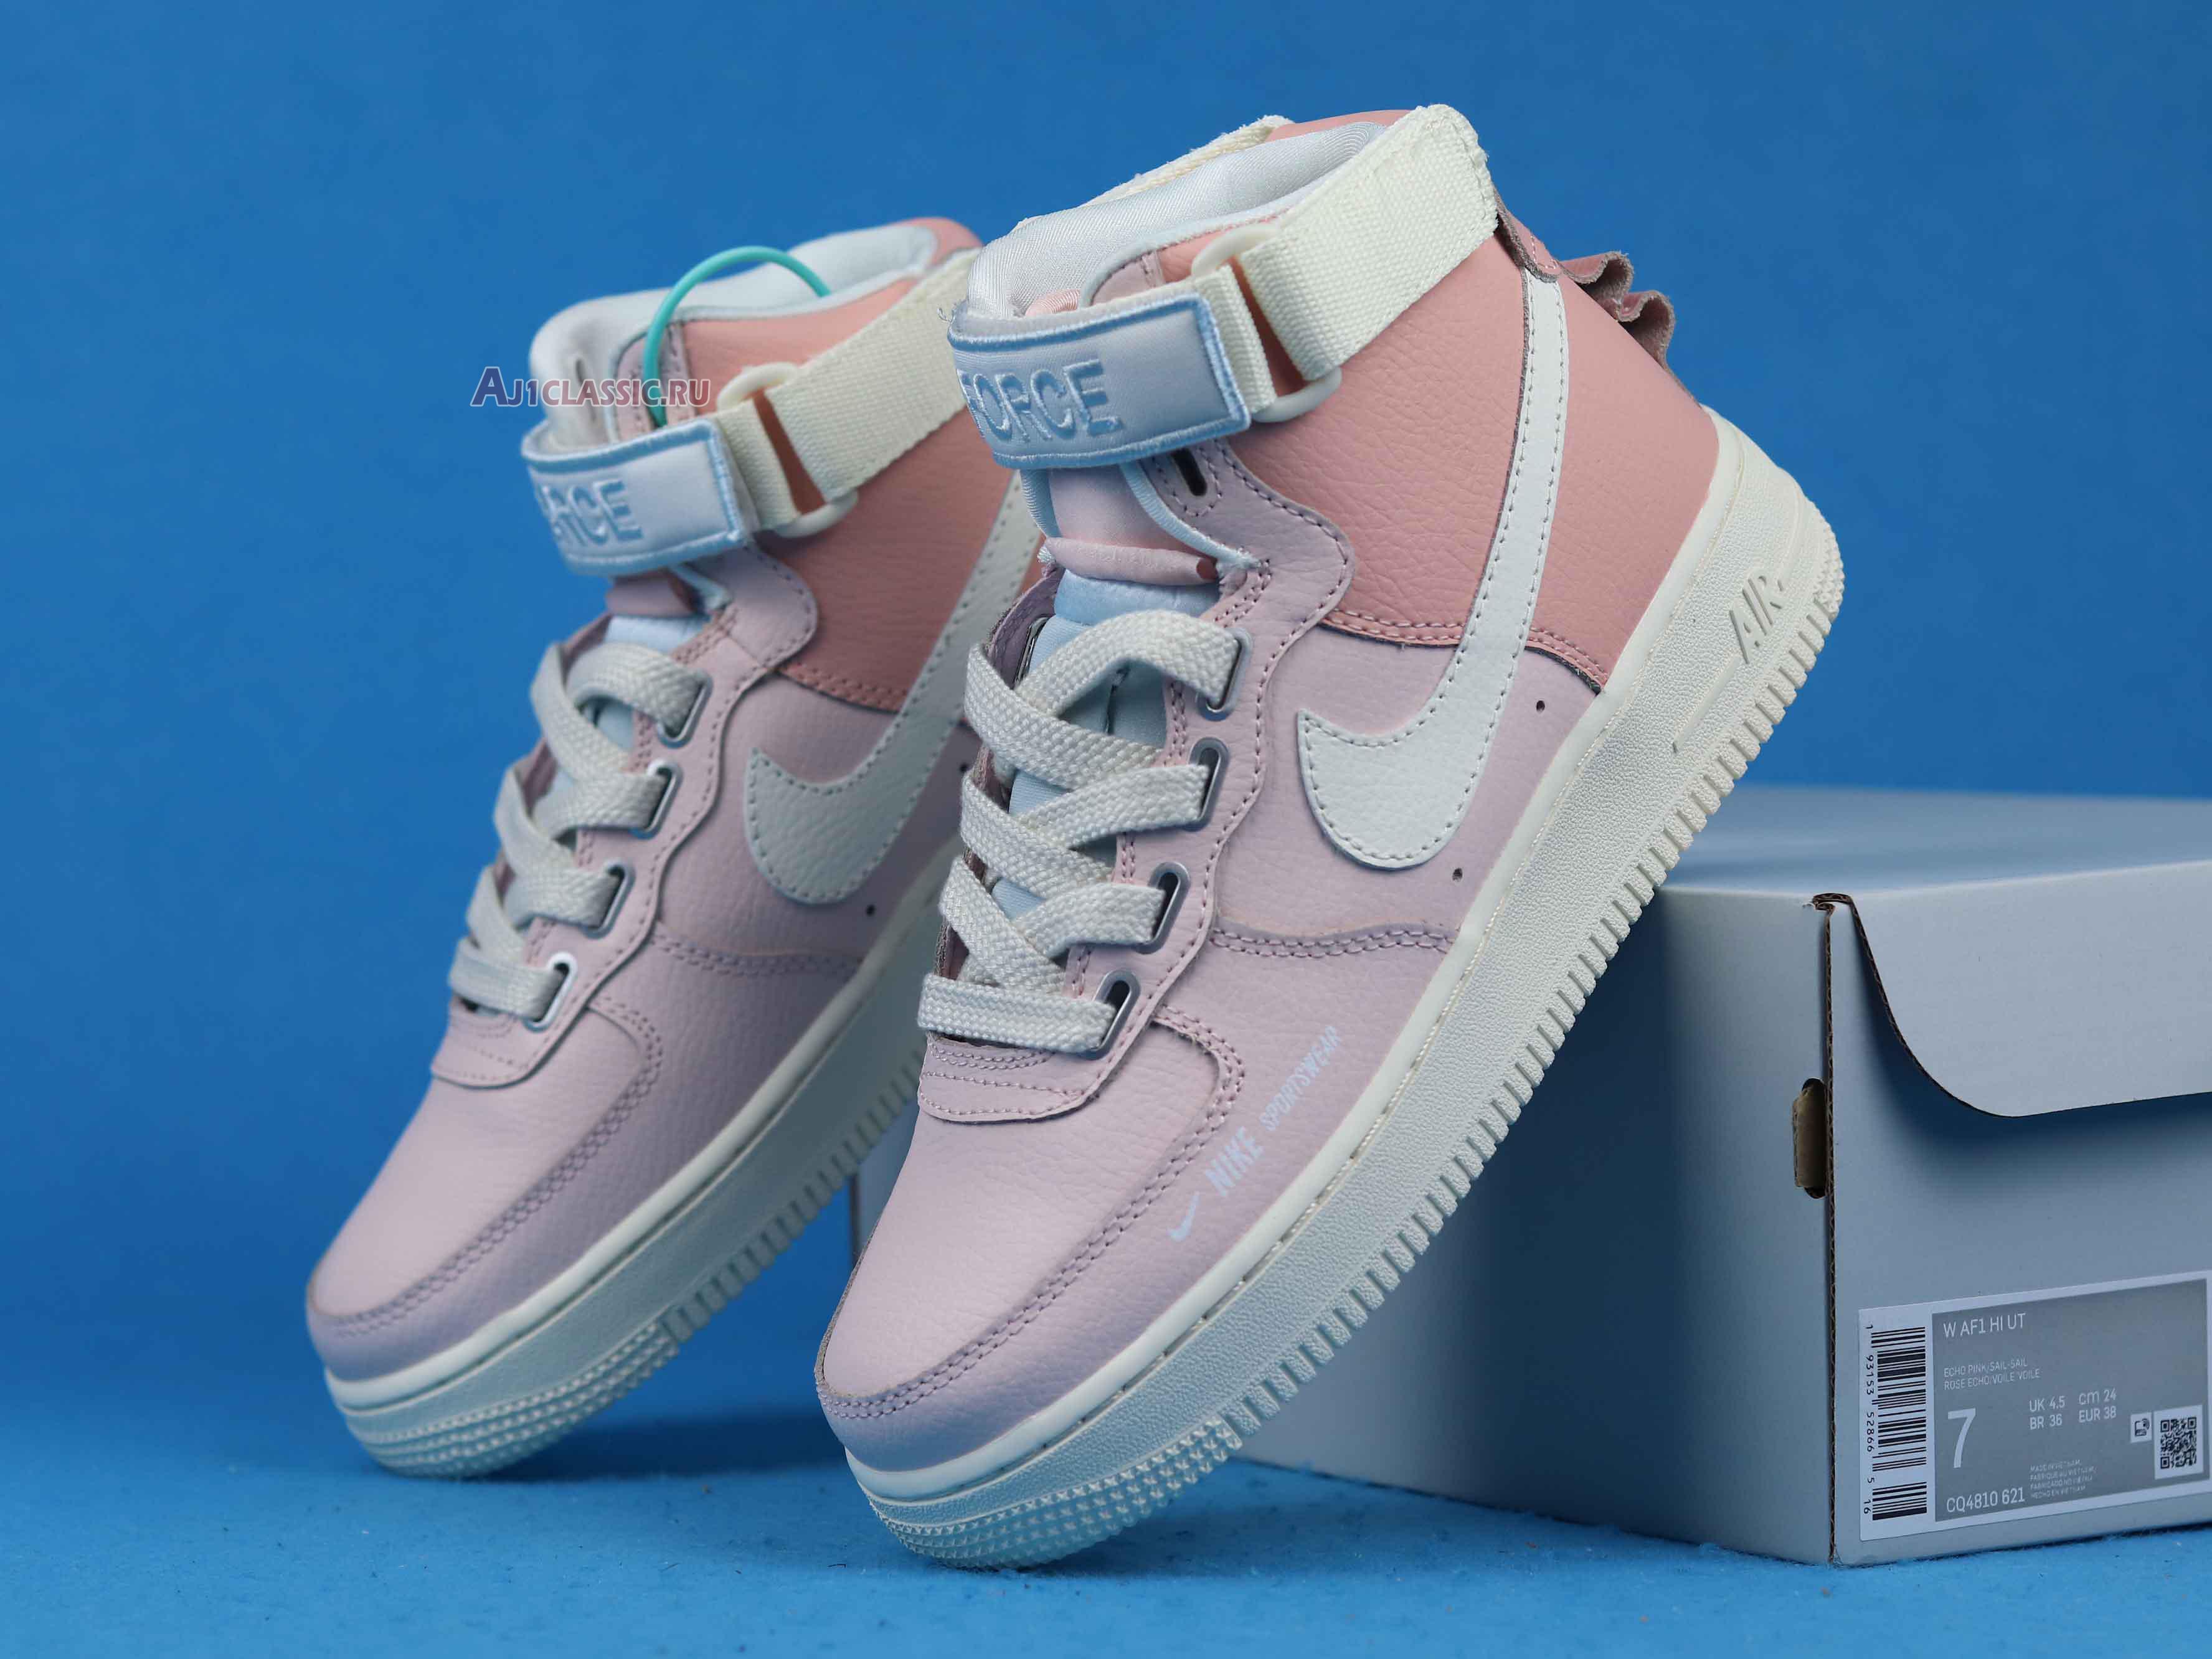 Nike Wmns Air Force 1 High Utility "Force is Female" CQ4810-621